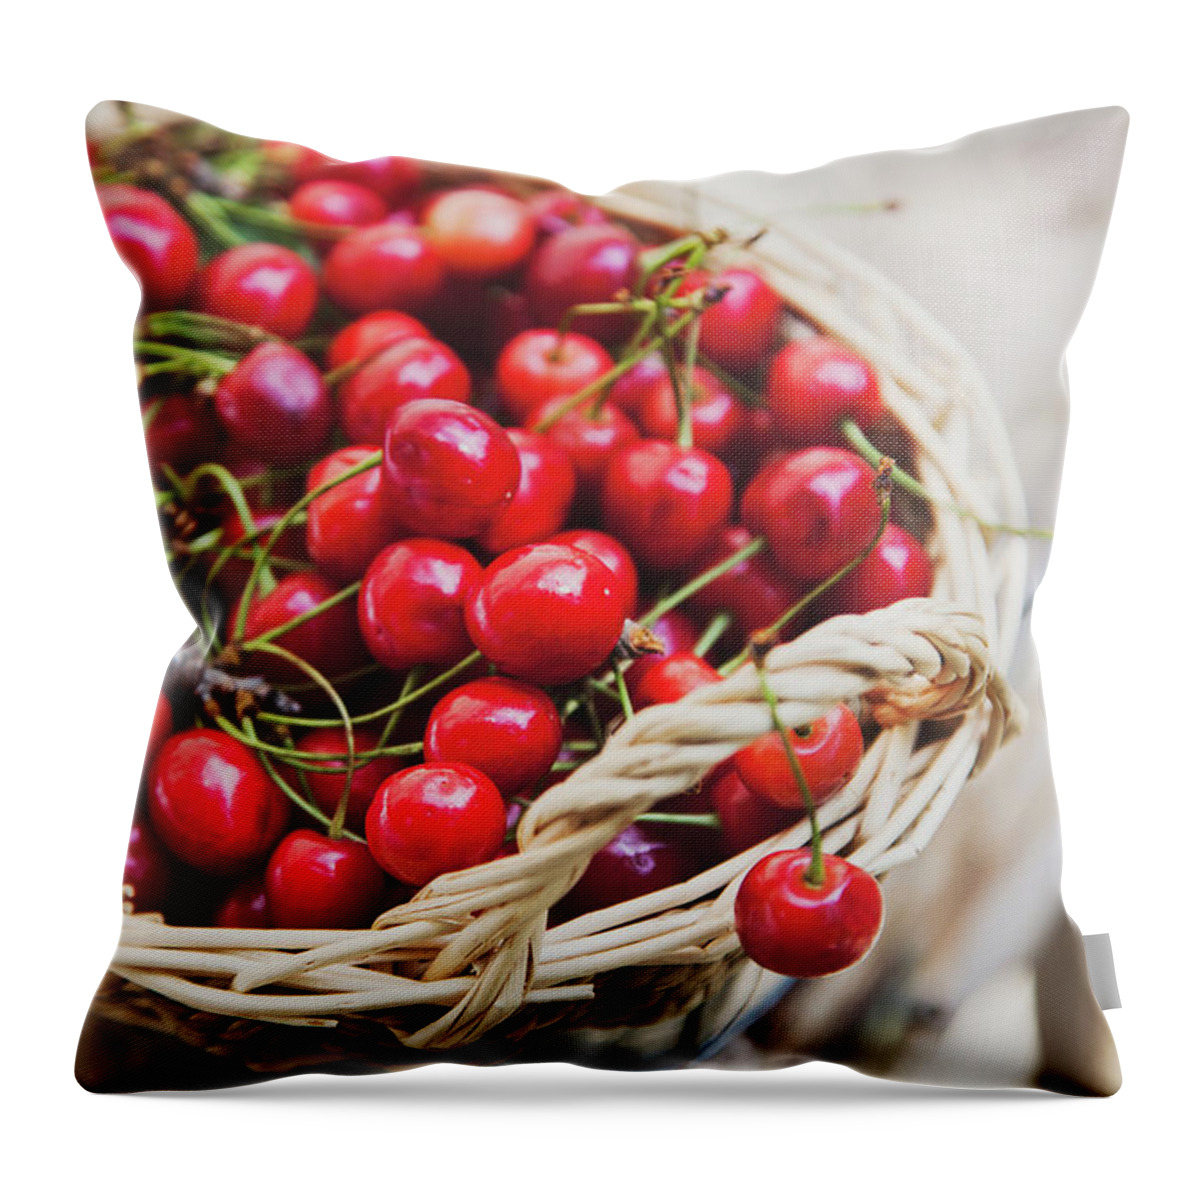 Cherry Throw Pillow featuring the photograph Basket Of Cherries by © Emoke Szabo